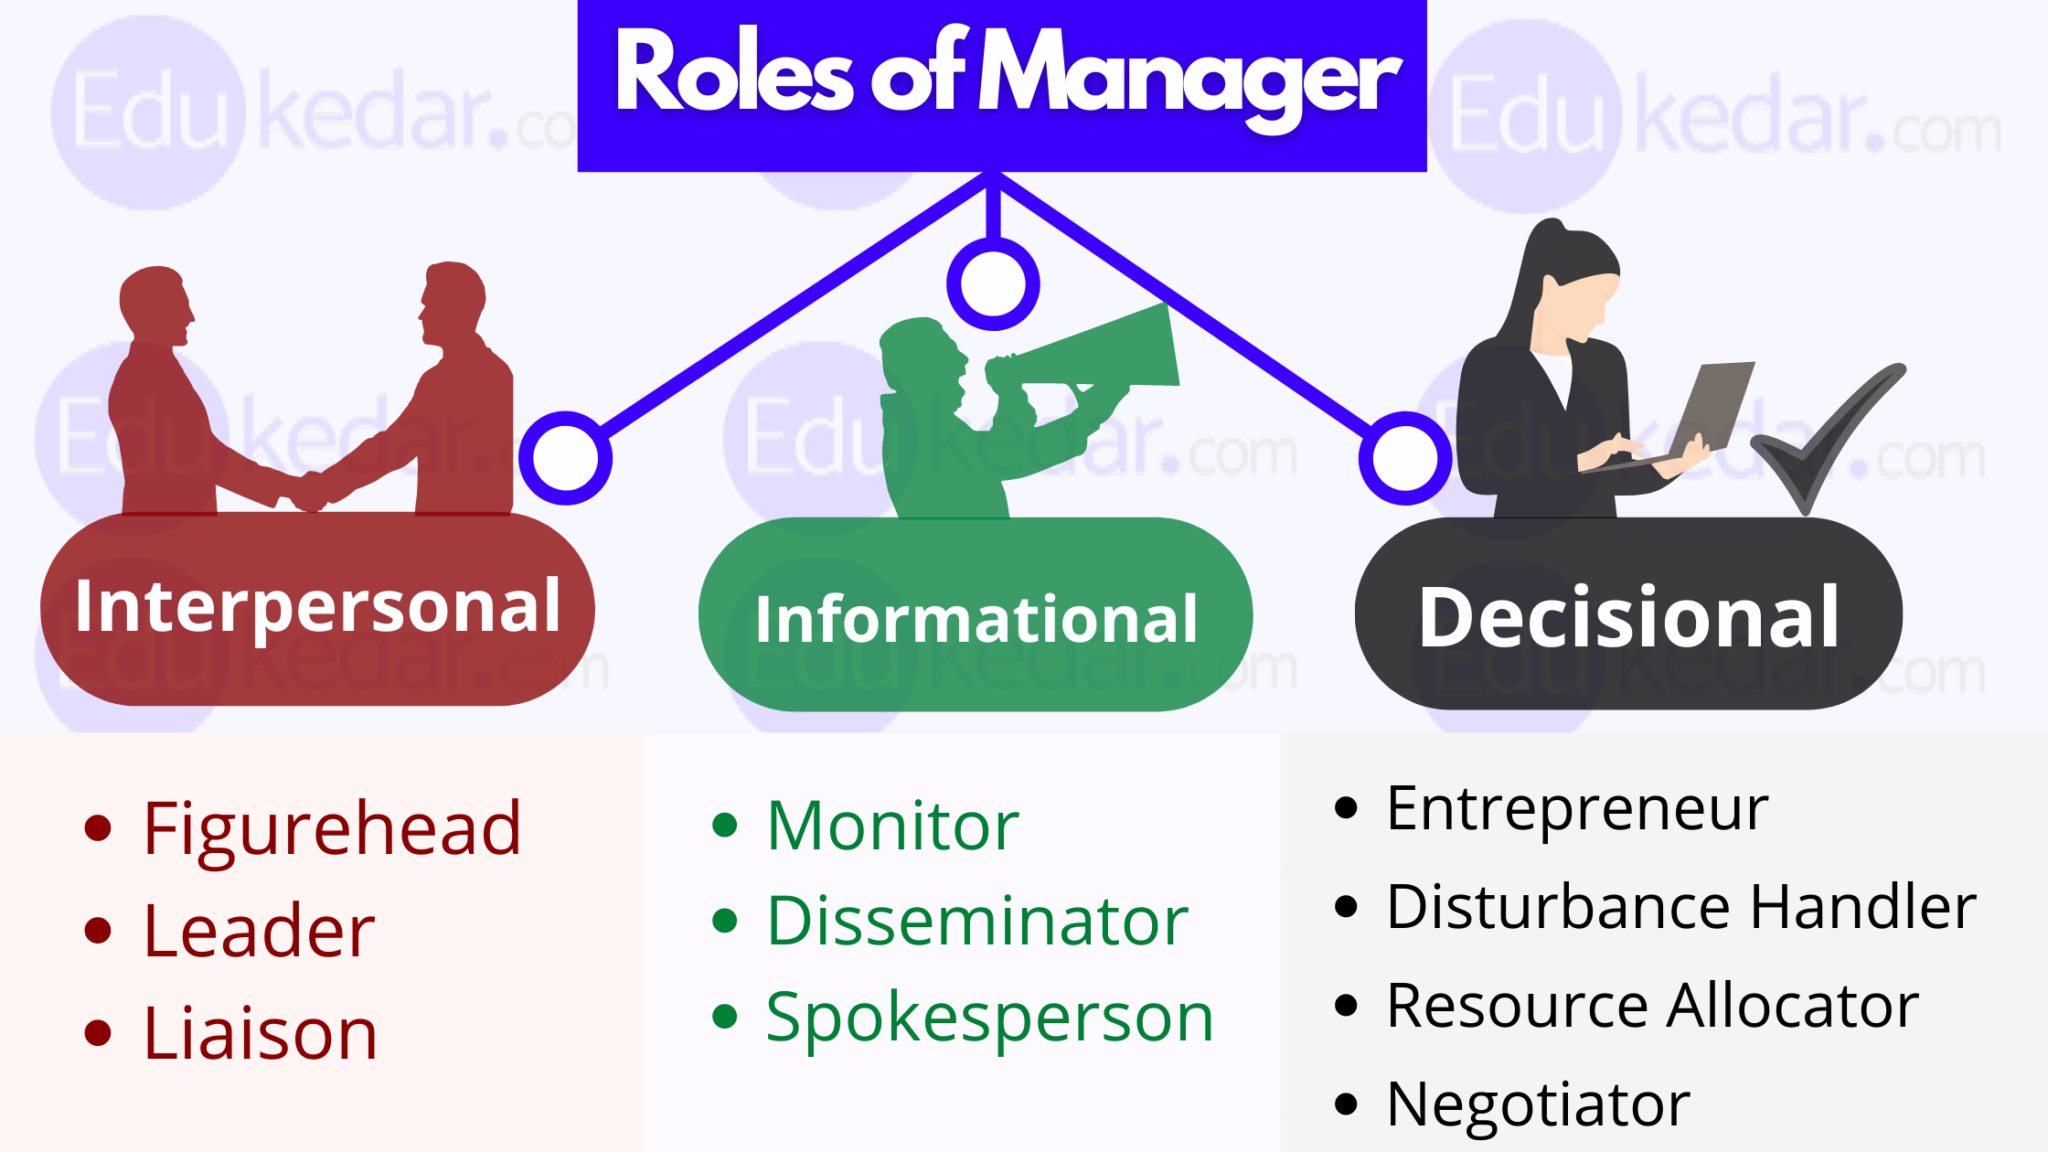 research about managerial skills